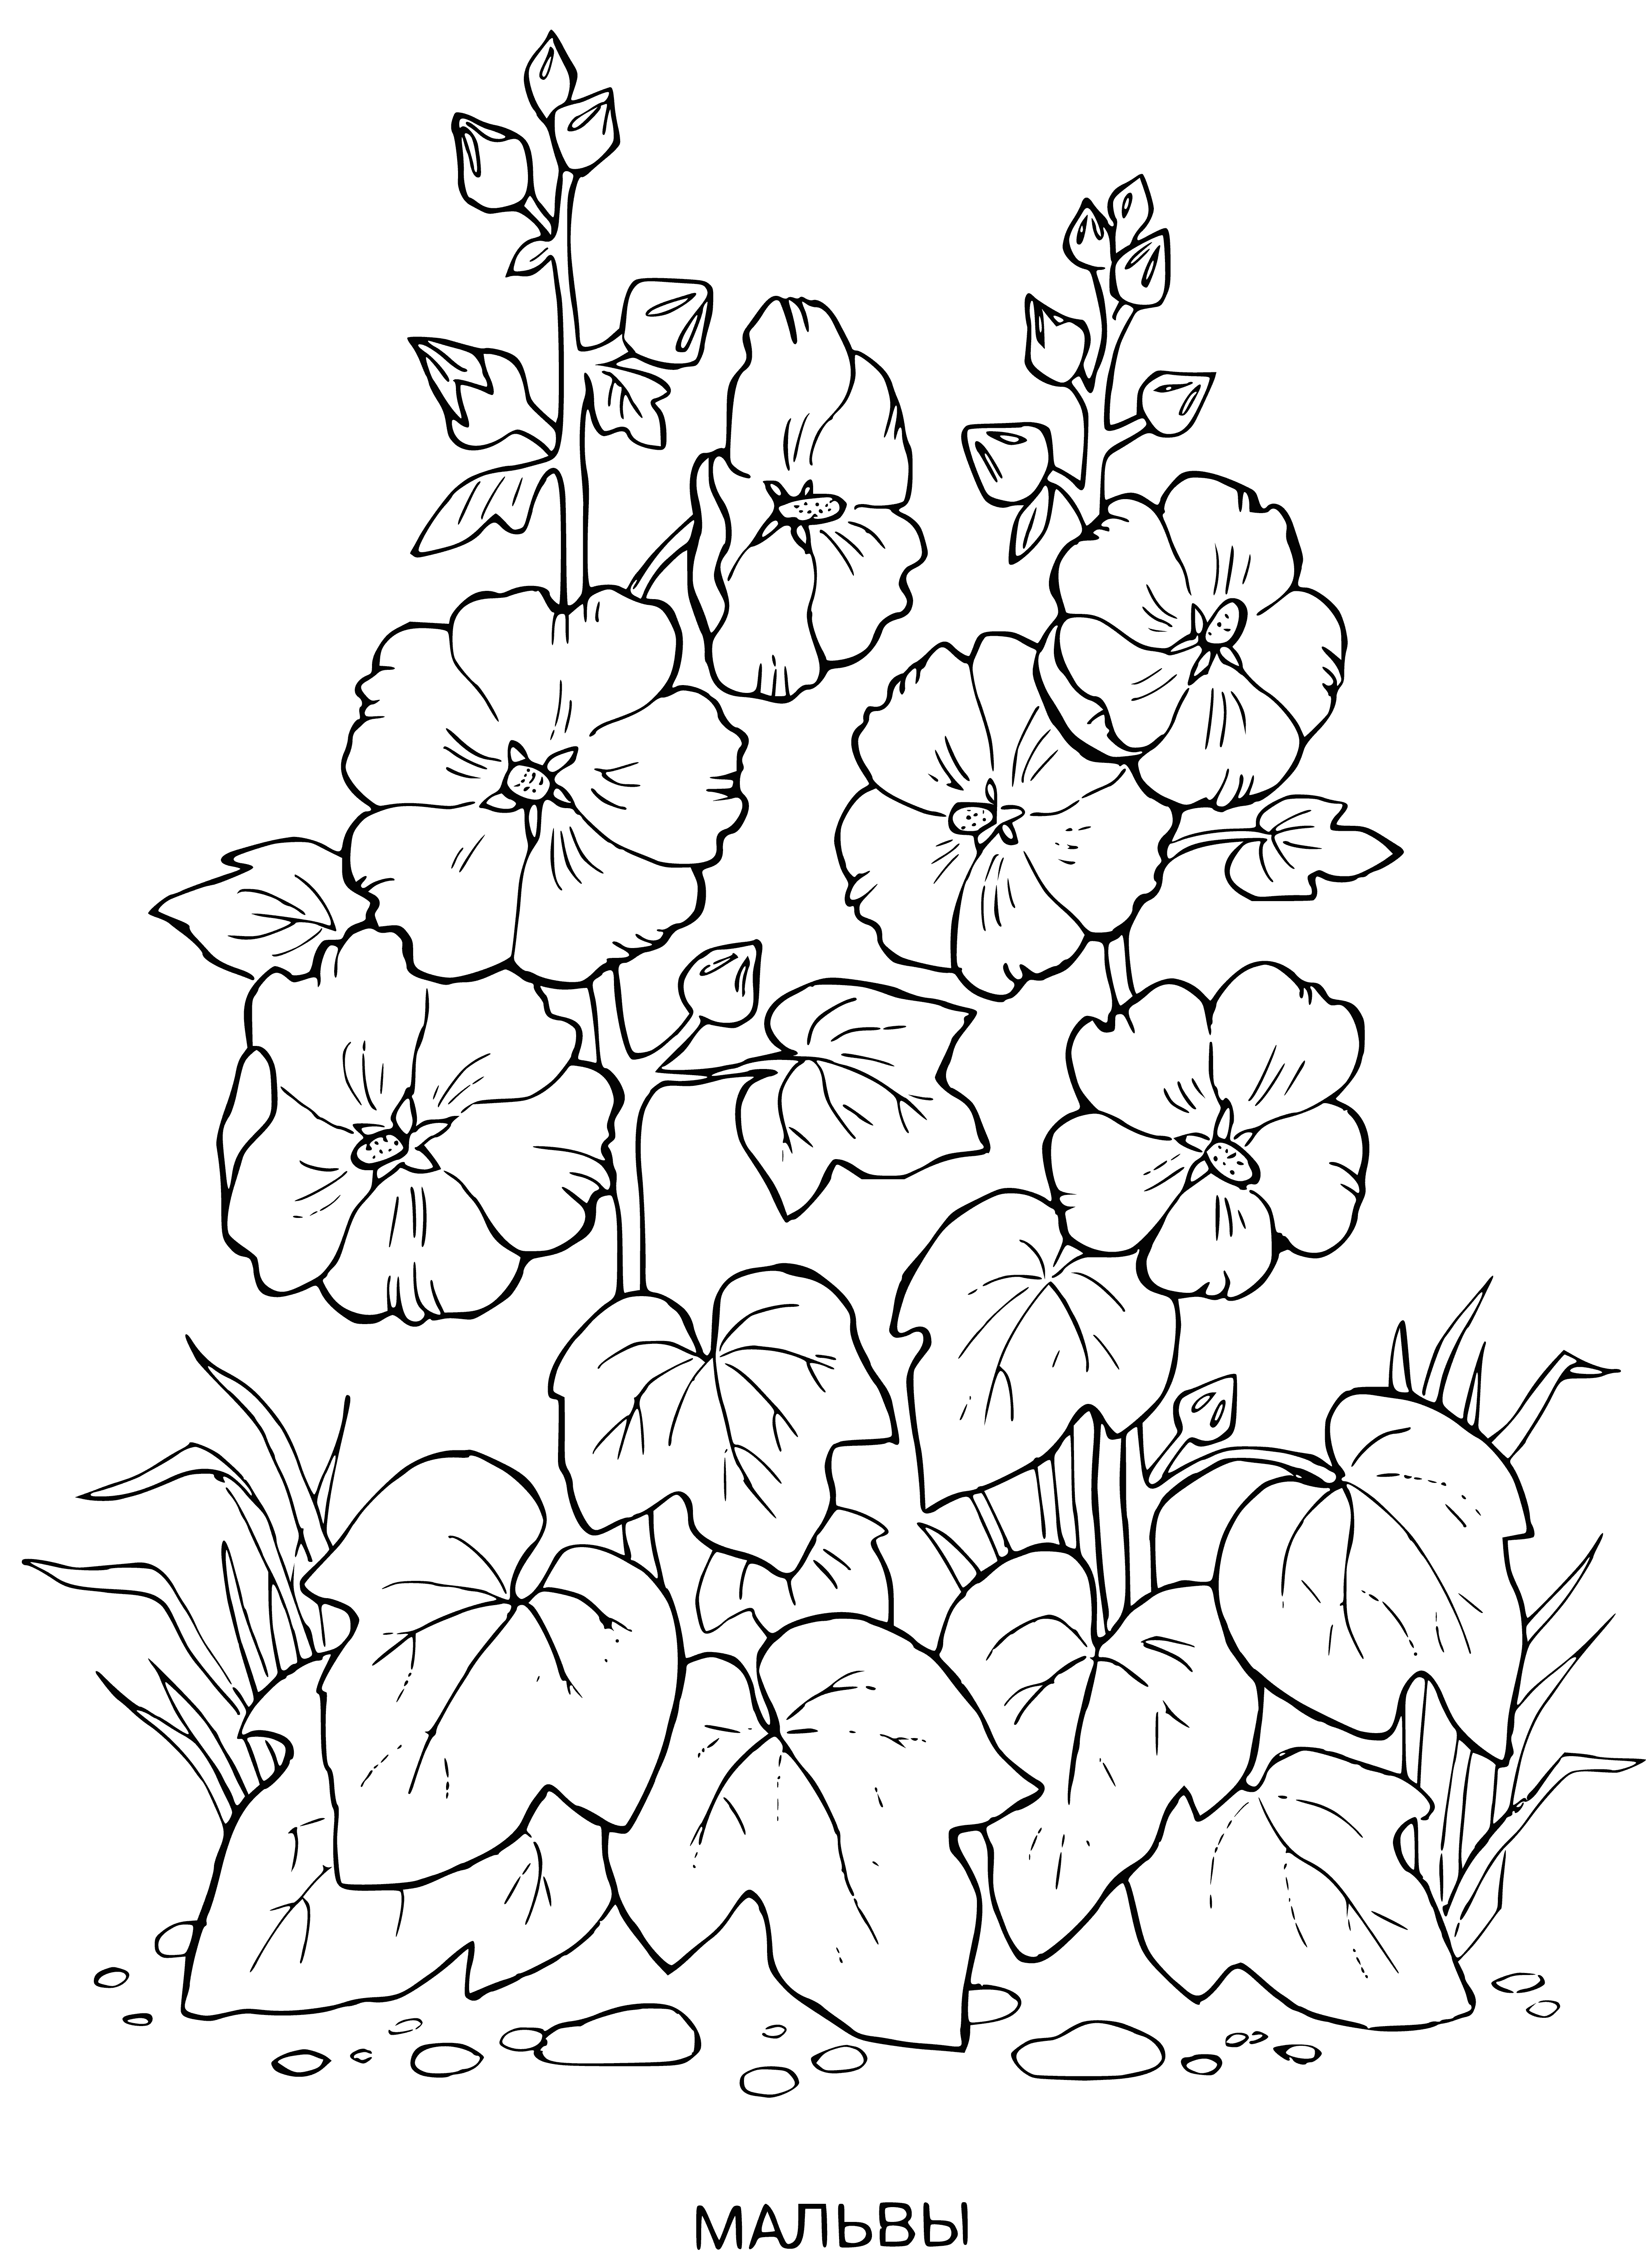 coloring page: Colorful mallow plants in bloom, w/ Five-petaled pink & white flowers & large, lobed leaves, growing in a field.